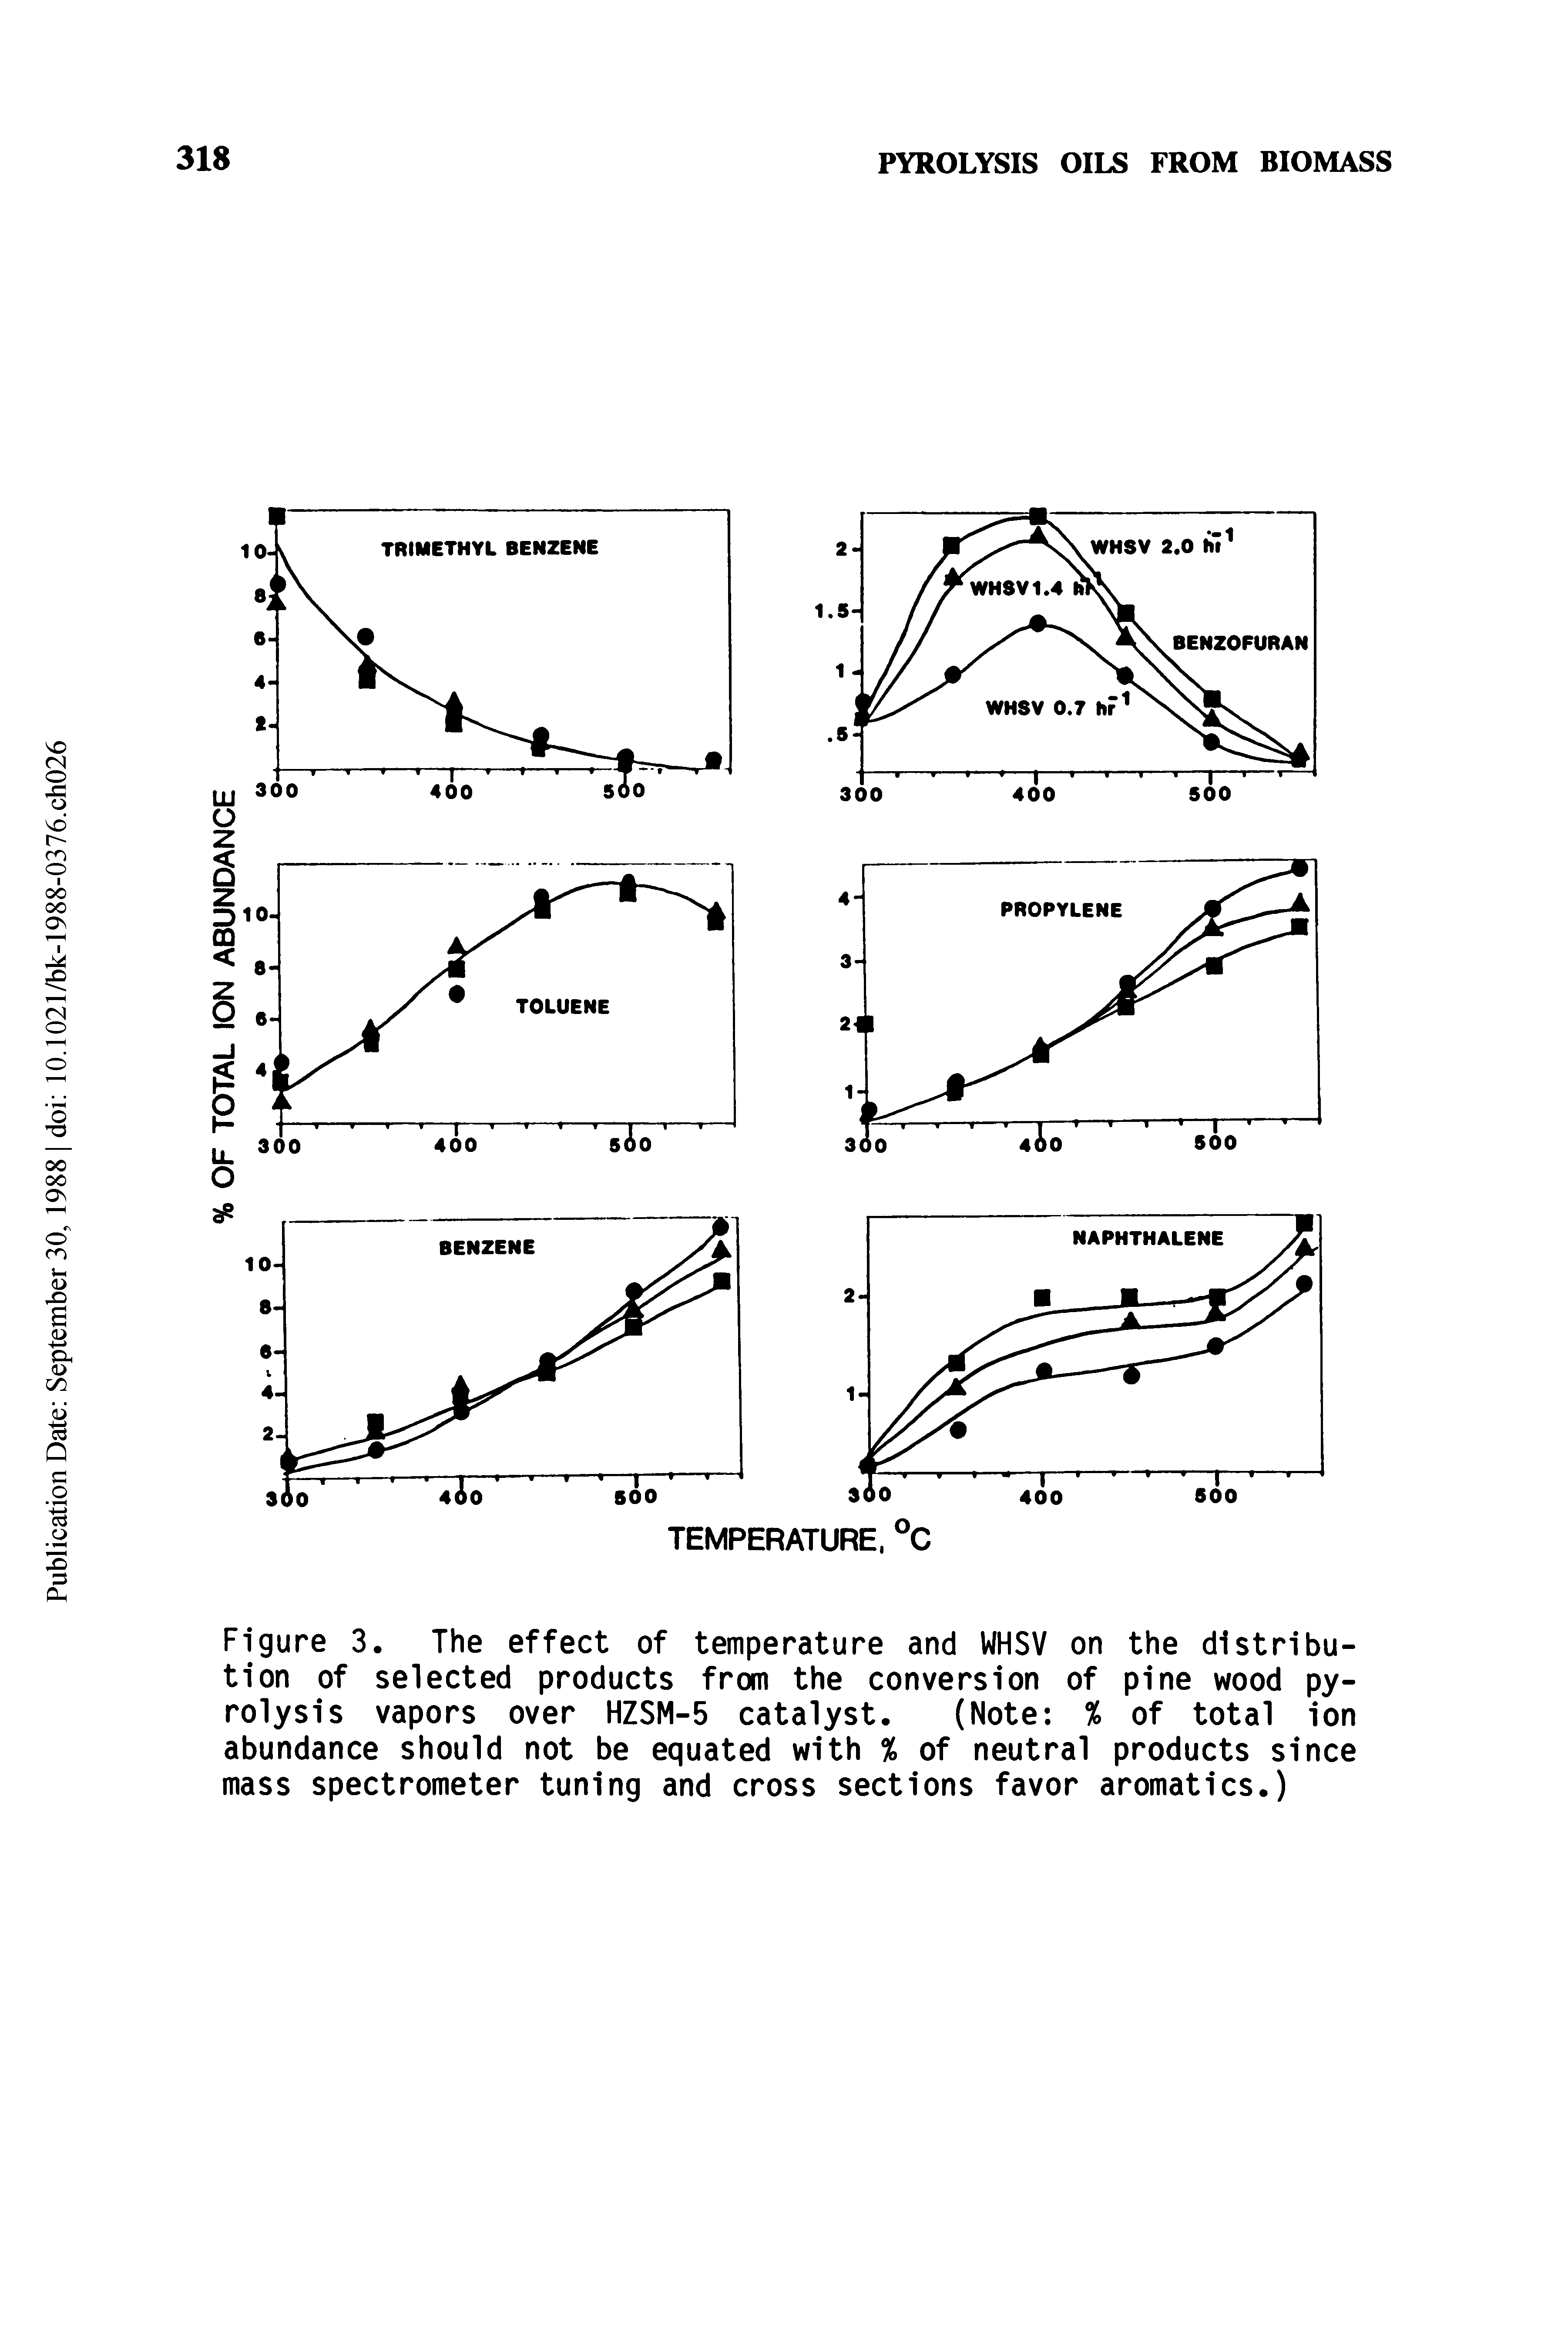 Figure 3. The effect of temperature and WHSV on the distribution of selected products from the conversion of pine wood pyrolysis vapors over HZSM-5 catalyst. (Note % of total ion abundance should not be equated with % of neutral products since mass spectrometer tuning and cross sections favor aromatics.)...